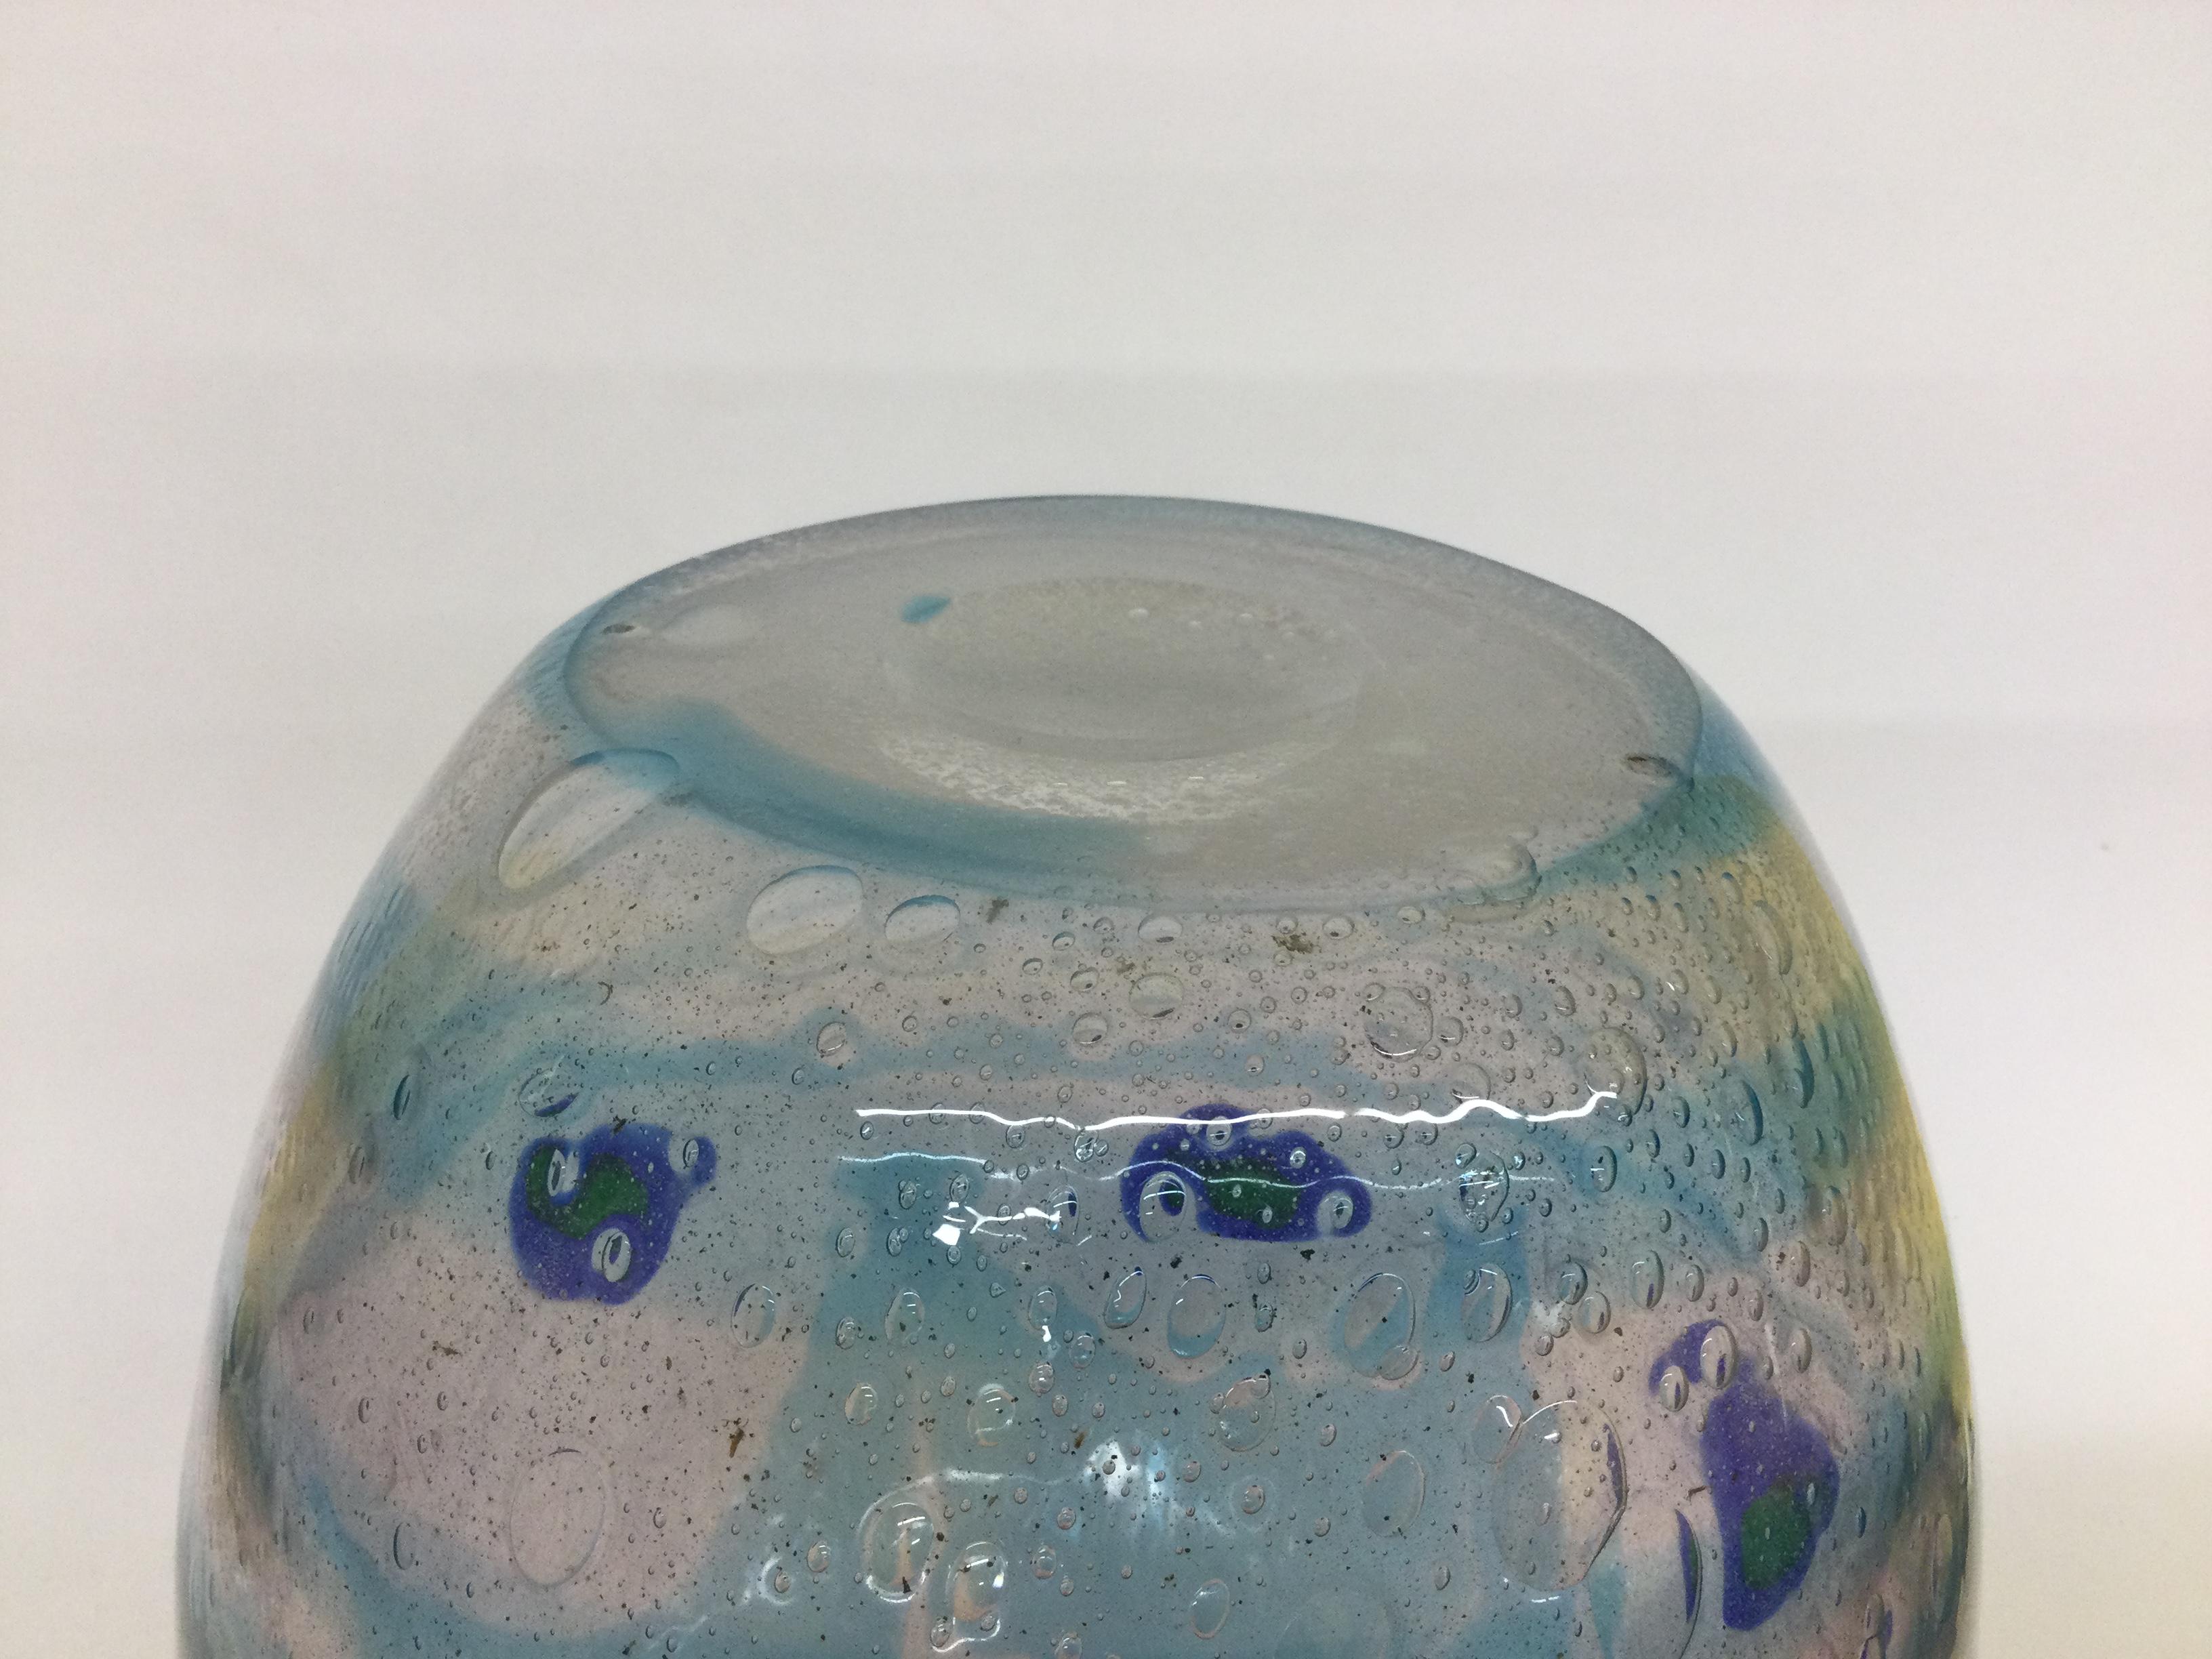 Amazing Pavone Vase designed by Anzolo Fuga for AVeM circa 1957 to 1960. Very finely detailed vase with swags of color with large Murrine decoration. Please notice the amazing bubbles in the glass that enhance the design. This decoration is shown in